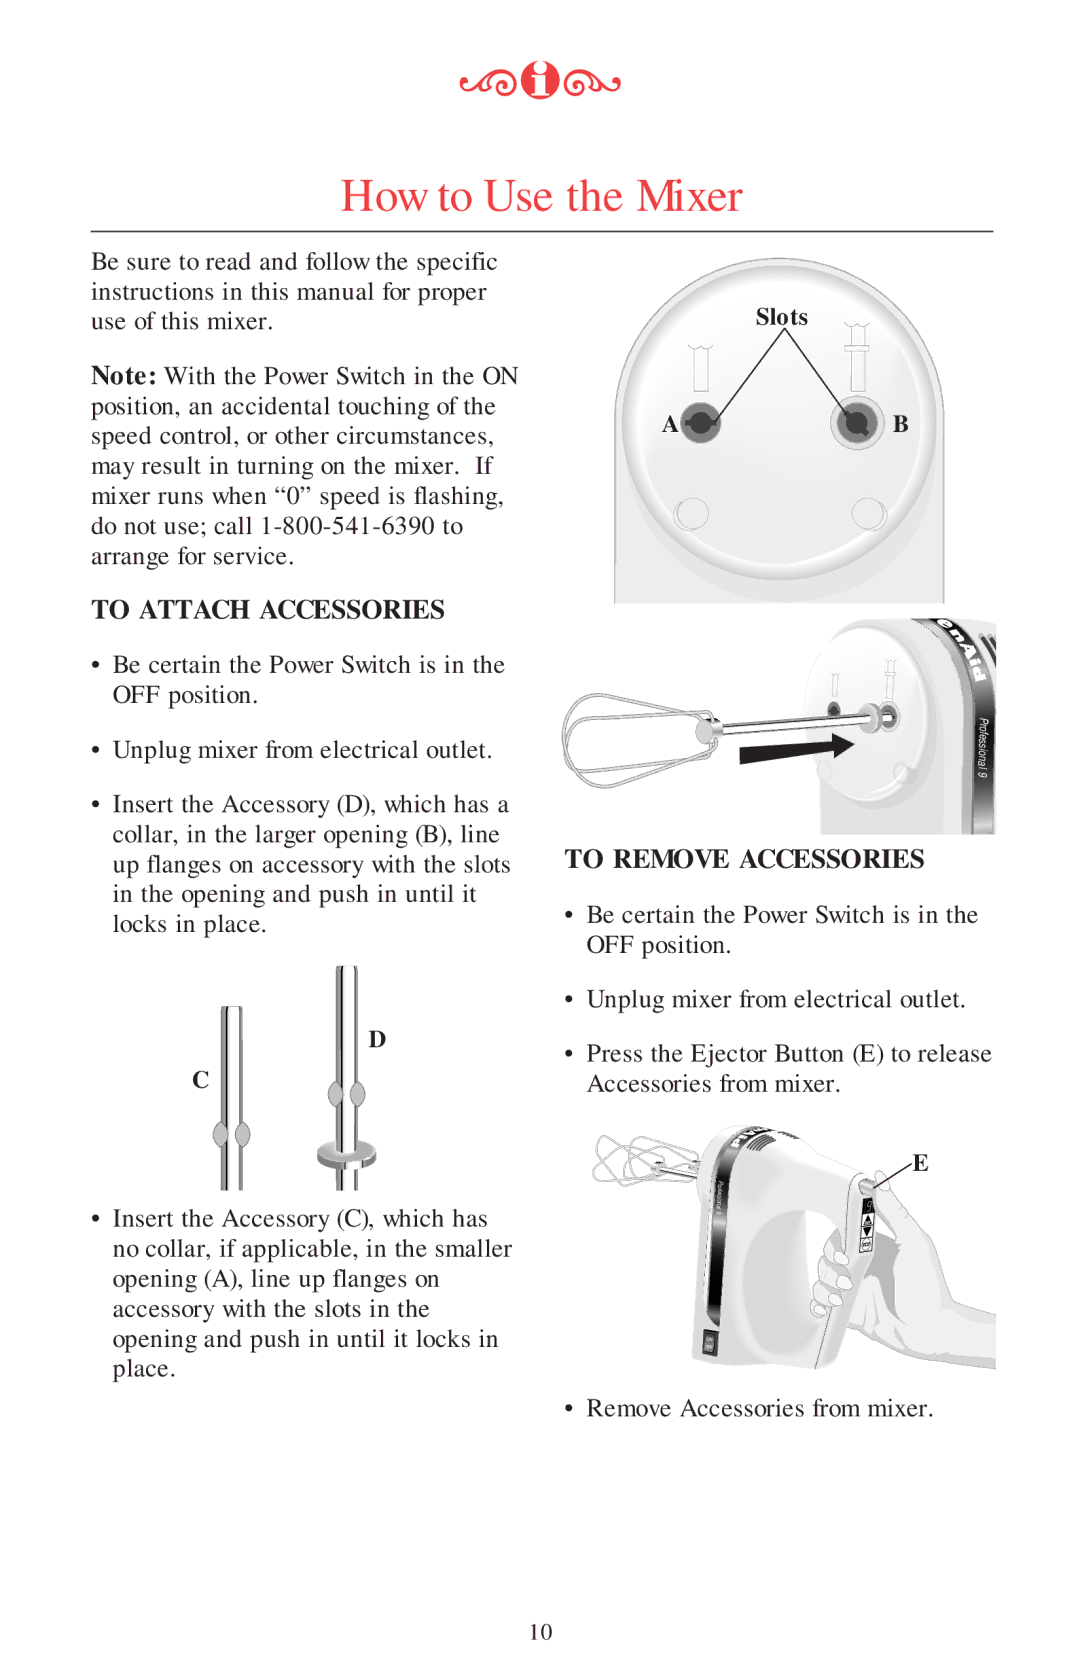 KitchenAid manual How to Use the Mixer, To Attach Accessories, To Remove Accessories 